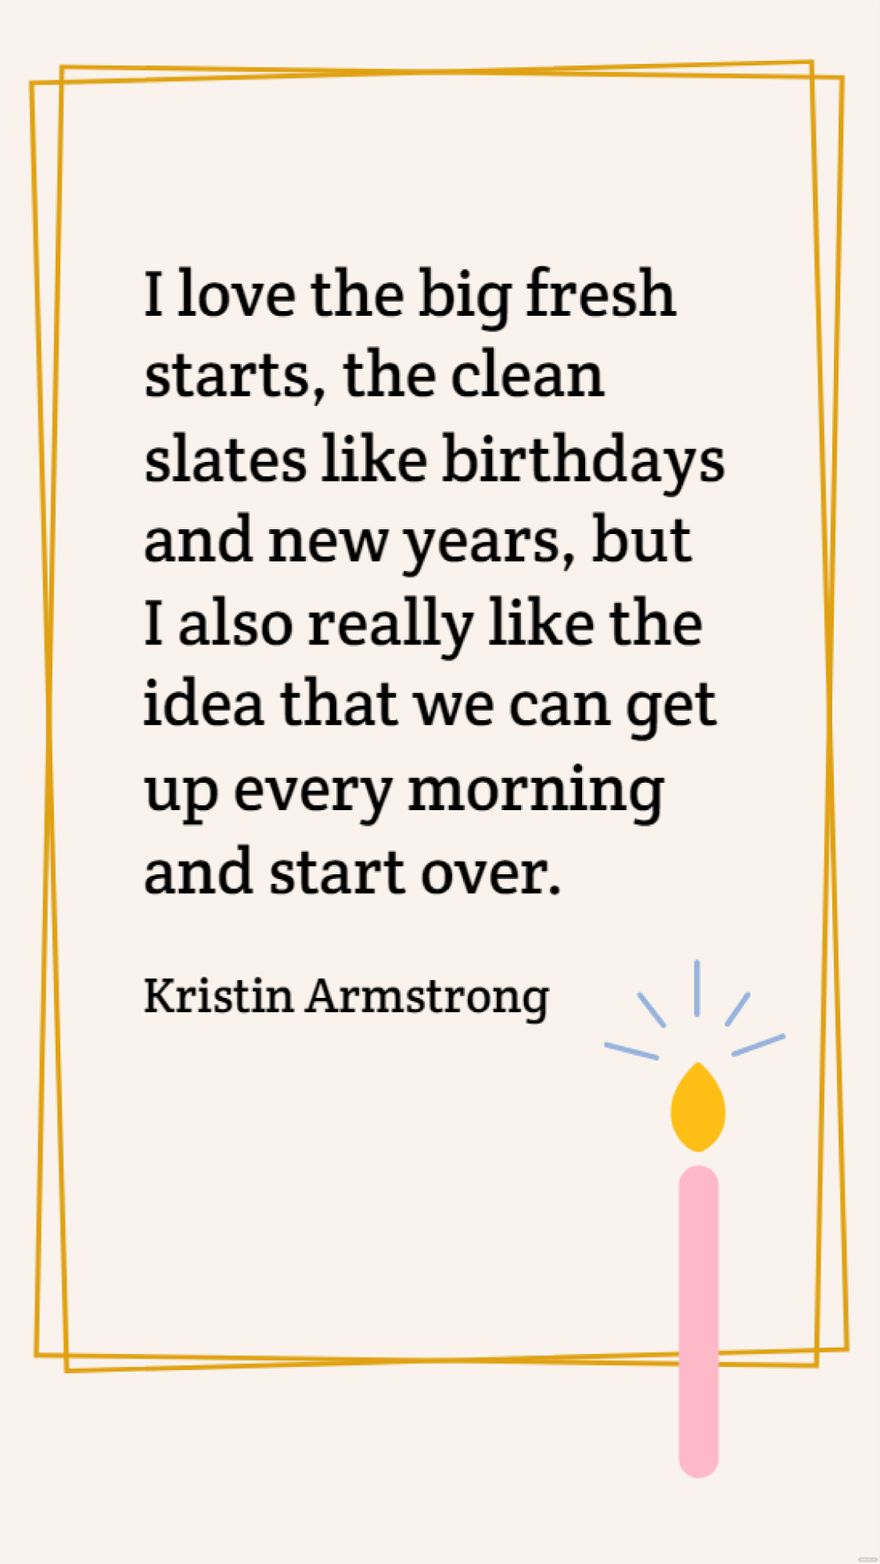 Kristin Armstrong - I love the big fresh starts, the clean slates like birthdays and new years, but I also really like the idea that we can get up every morning and start over.